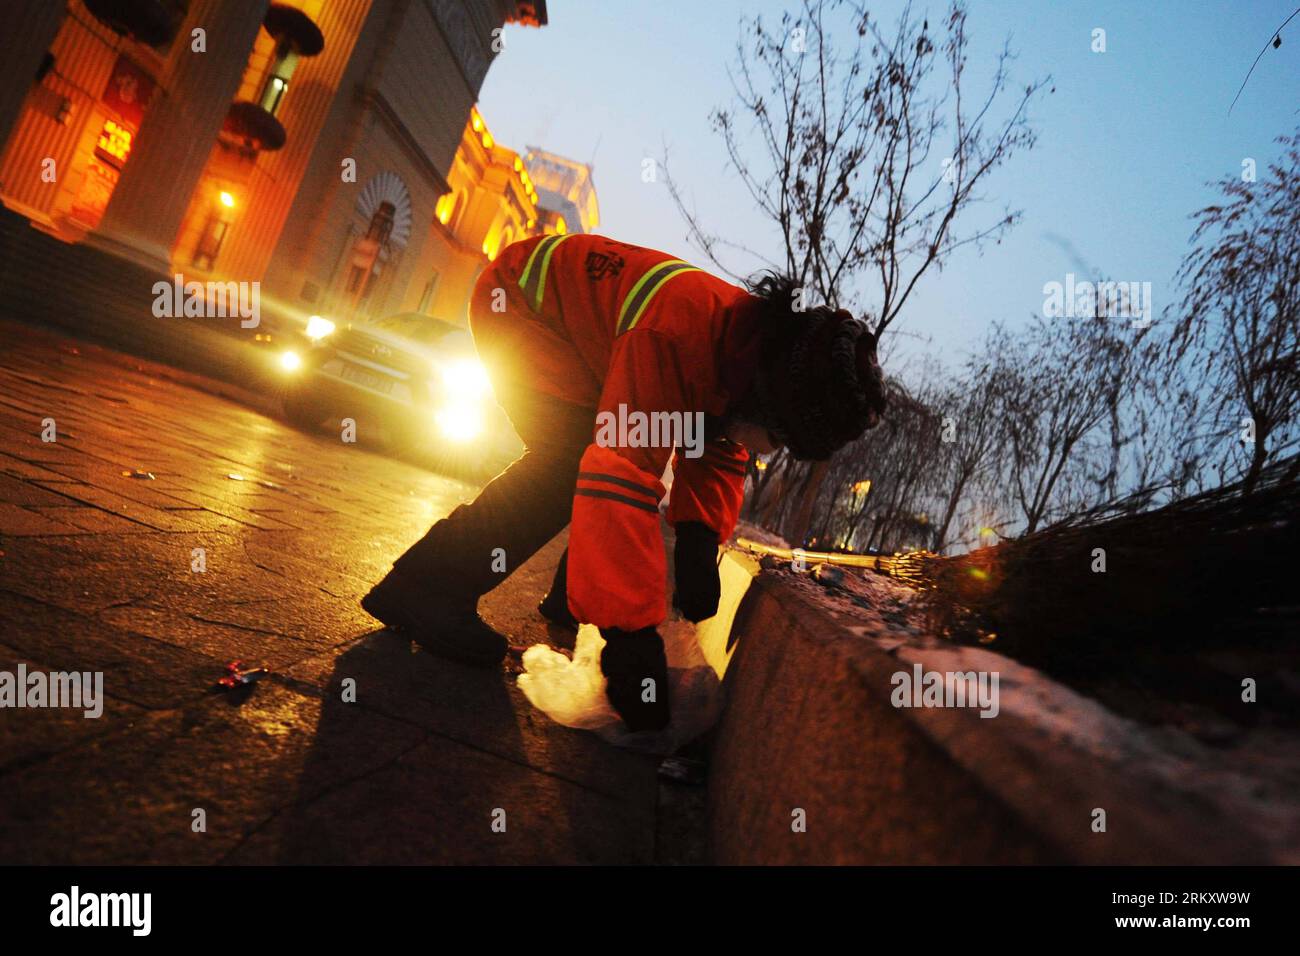 Bildnummer: 59095362  Datum: 16.01.2013  Copyright: imago/Xinhua HARBIN, Jan. 16, 2013 (Xinhua) -- Sanitation worker Yang Weixia stoops to pick up a plastic handbag on a road in Harbin, capital of northeast China s Heilongjiang Province, Jan. 16, 2013. Yang Weixia, 48, is an ordinary sanitation worker living in Harbin, a city known for its bitterly cold winters and often called the Ice City. For 32 years, Yang has never stopped sweating away at her work, though she often gets up at three o clock every morning and will not go back home until 9 in the evening in the cold winter. There are more t Stock Photo